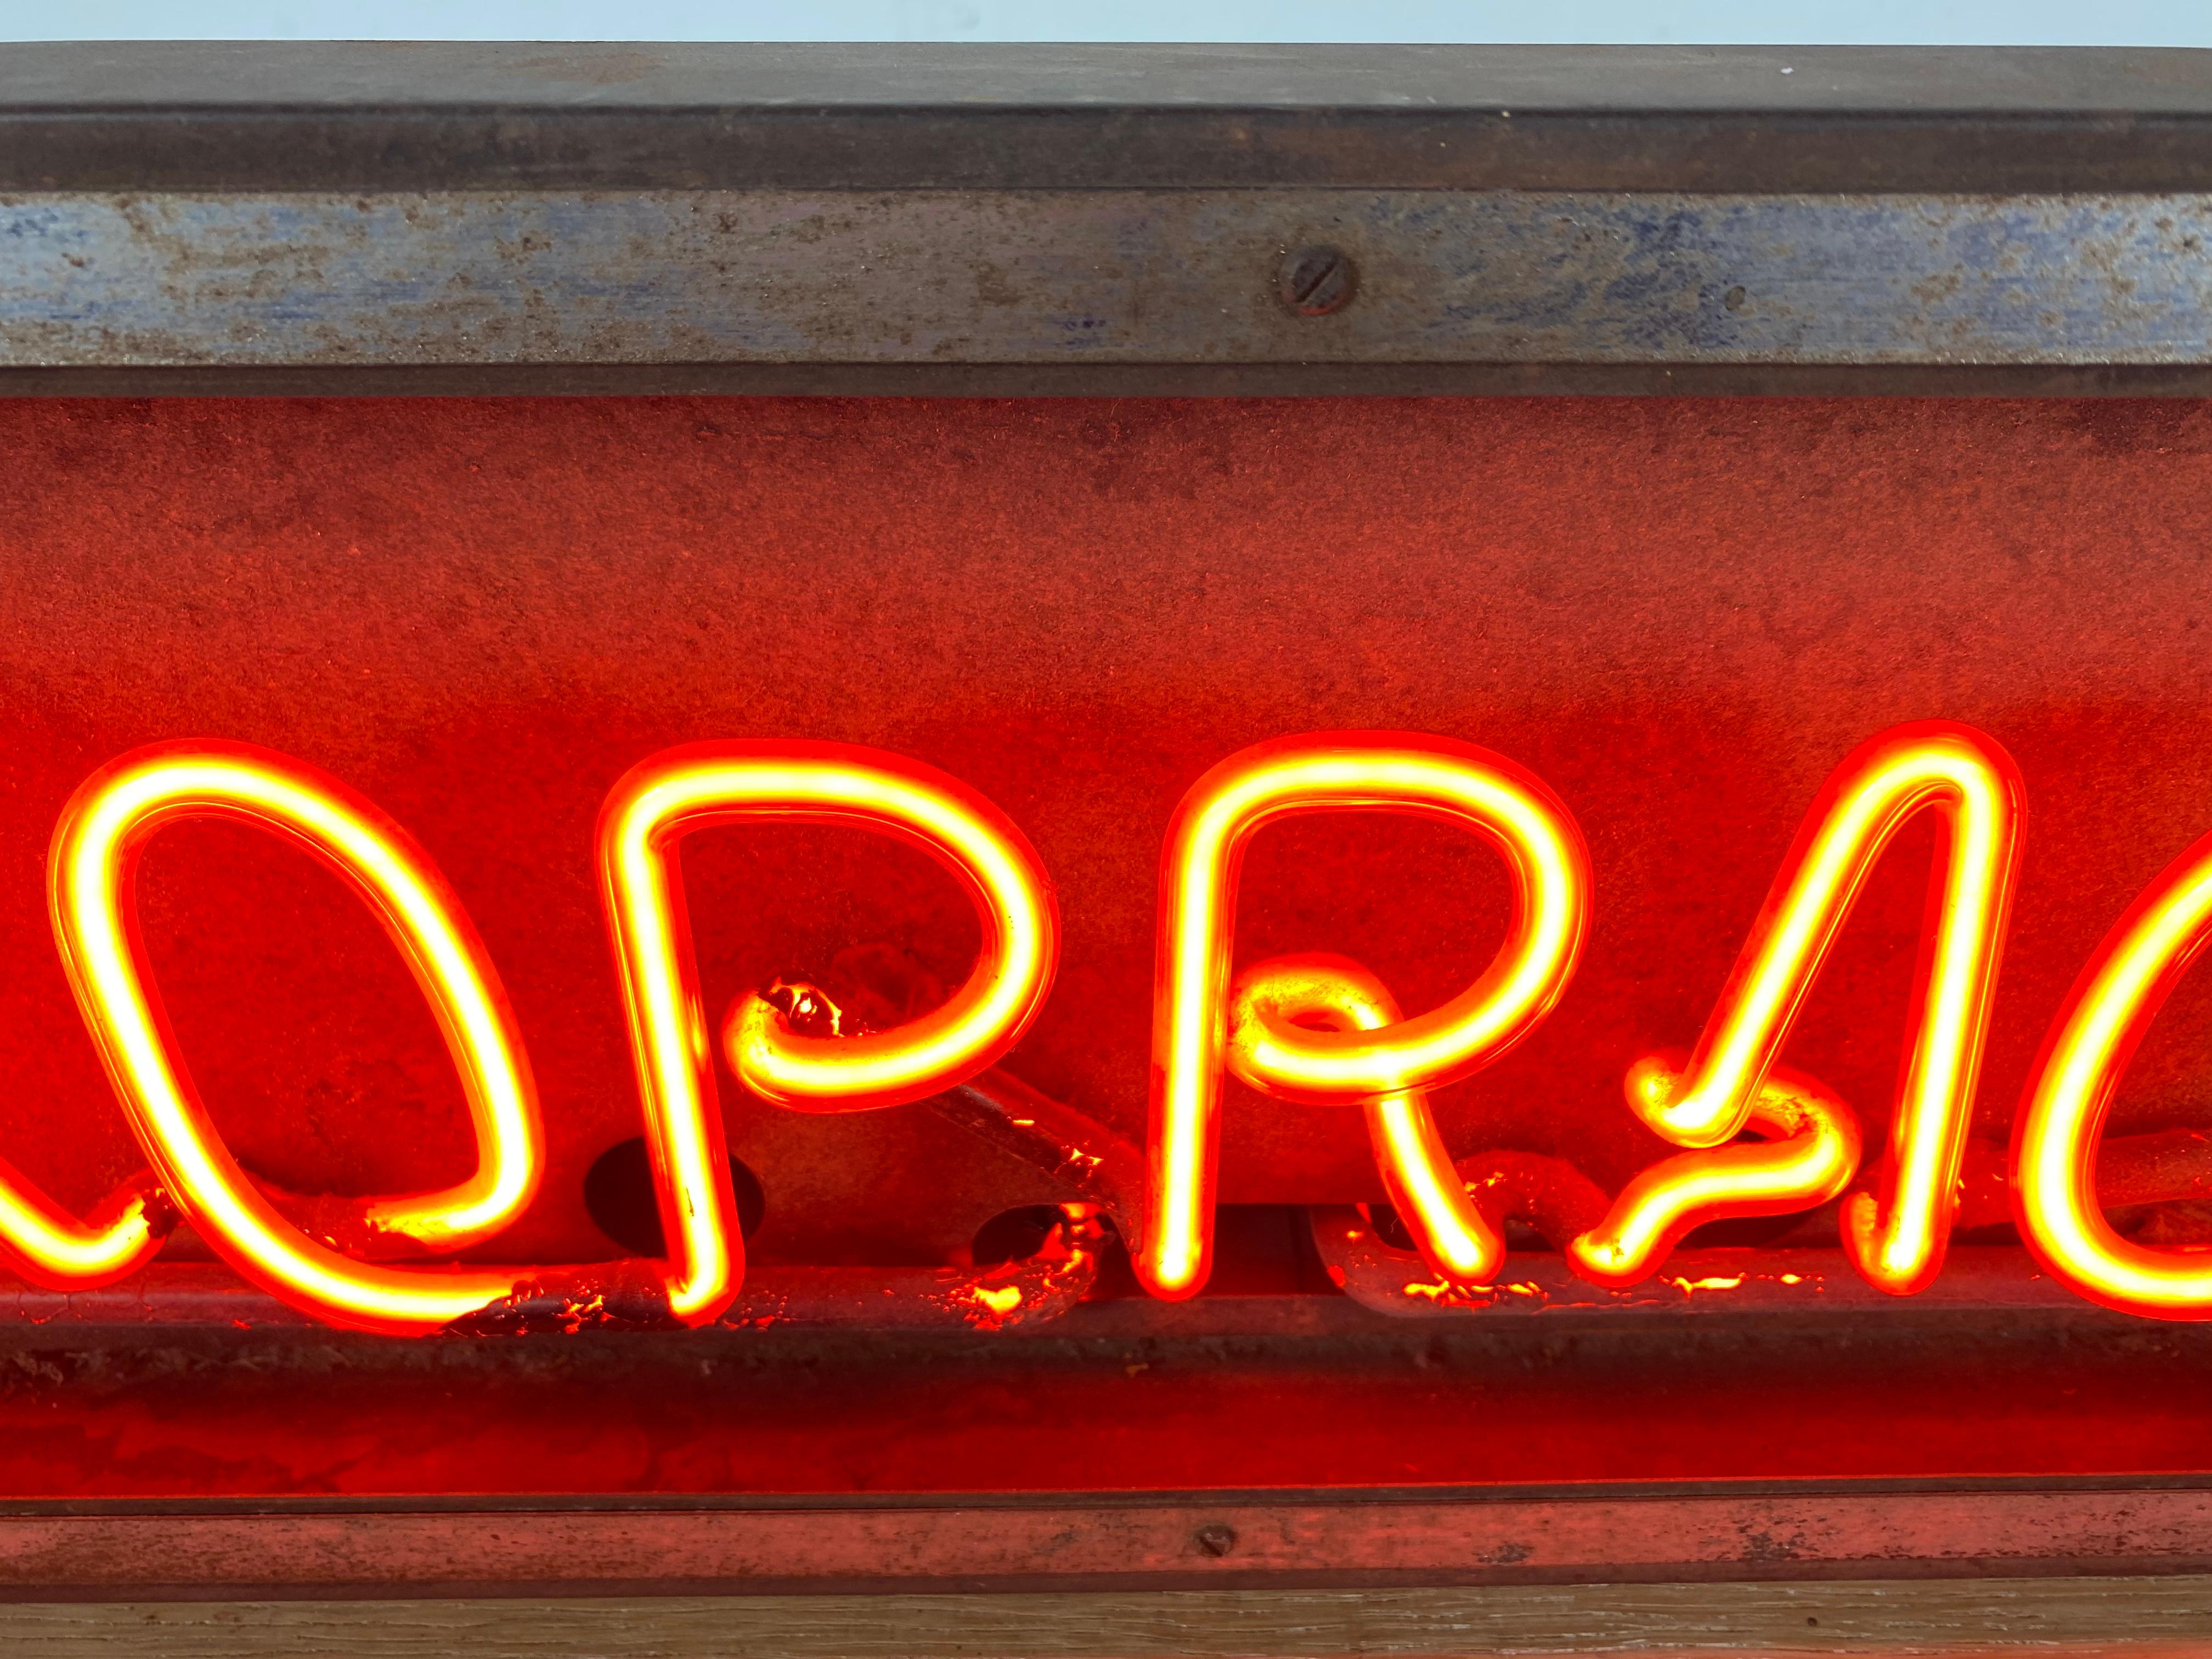 1930s Art Deco Chriopractor Neon Can Sign For Sale 1